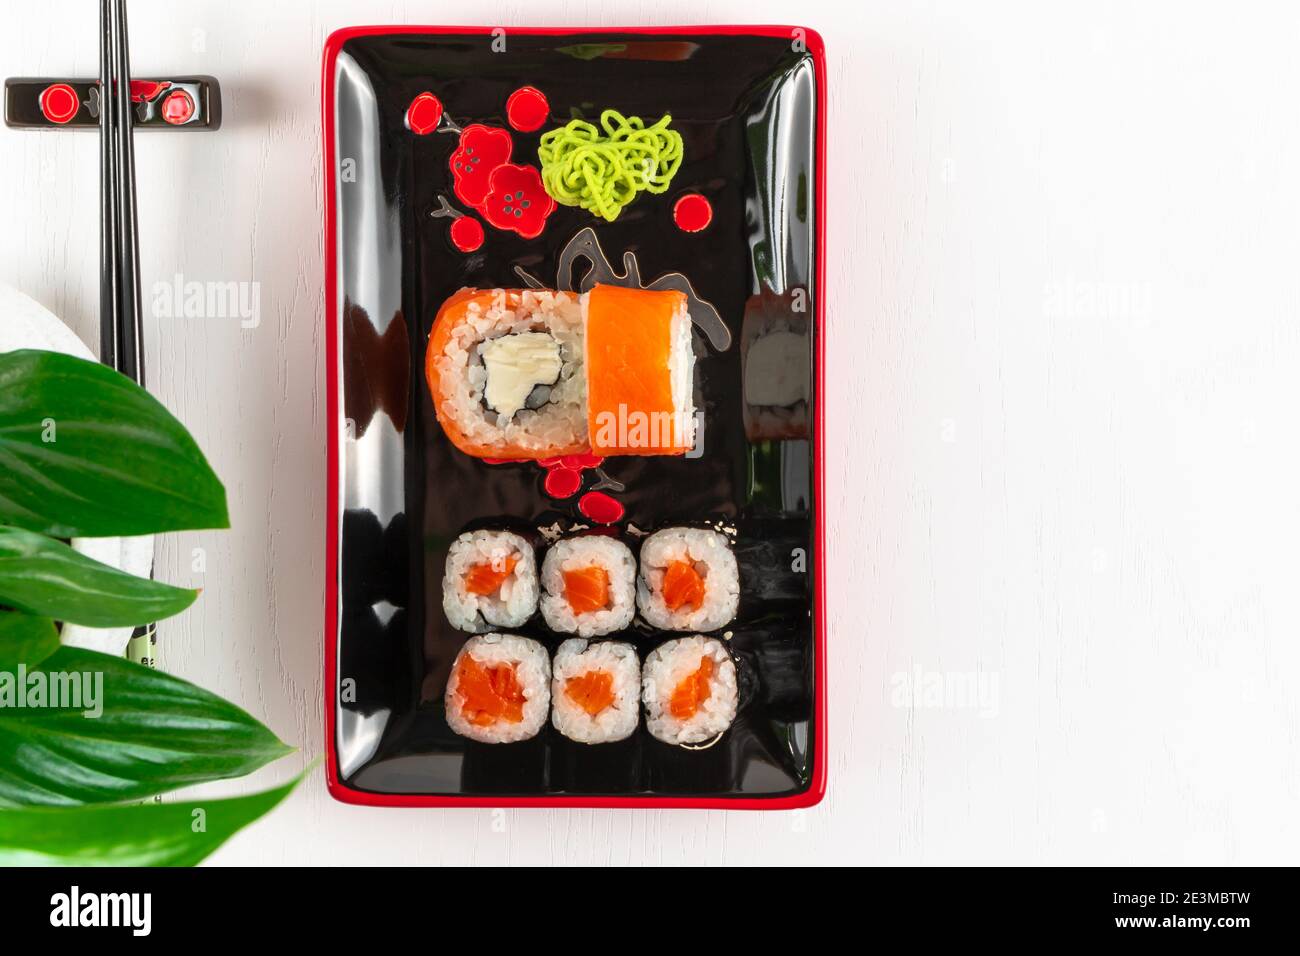 fresh appetizing rolls with salmon in nori seaweed in black-red plates on a white plate. near young green leaves of a plant Stock Photo